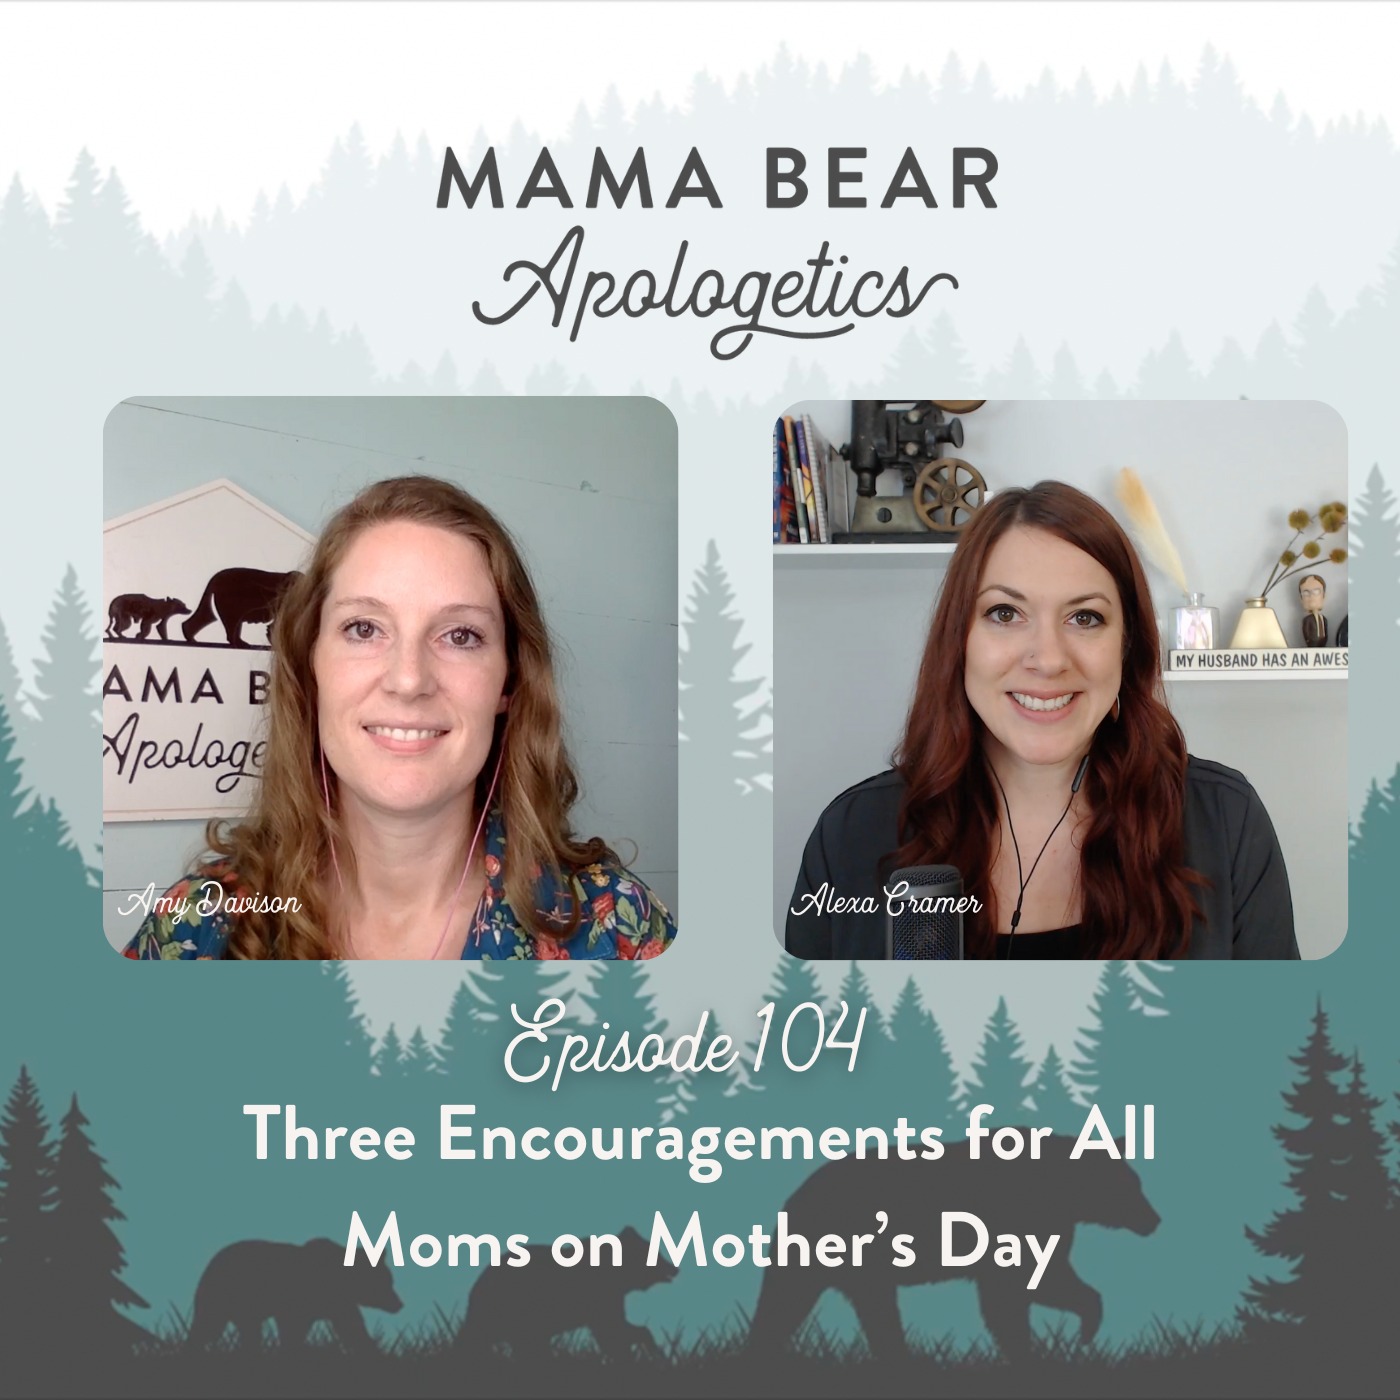 Episode 104. Three Encouragements for All Moms on Mother's Day